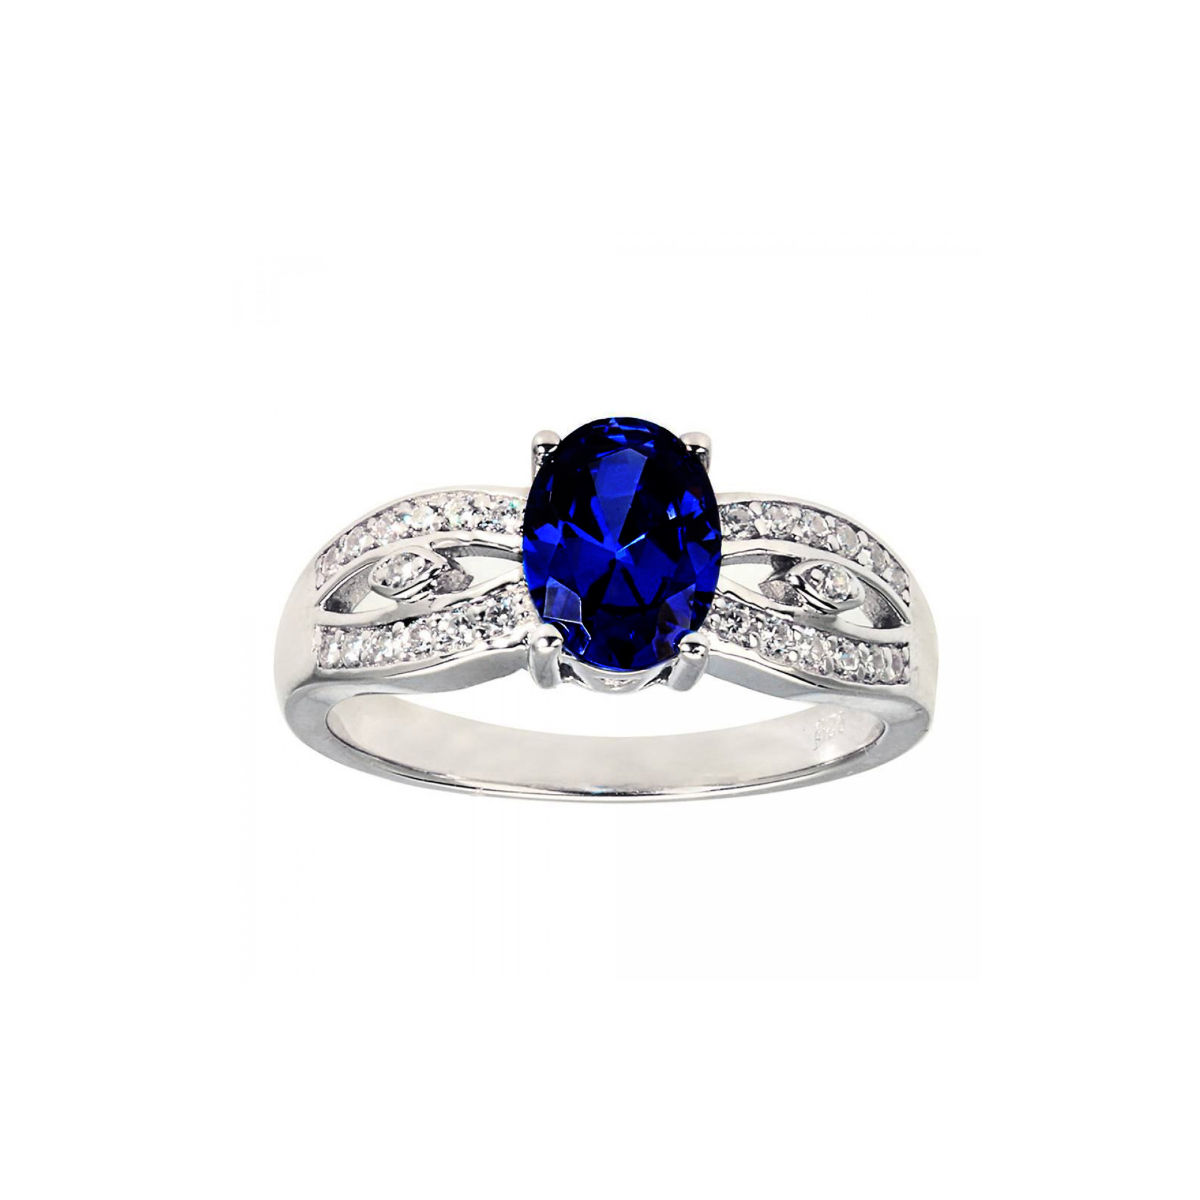 Blue sapphire ring with emerald art deco vintage style colorful ring